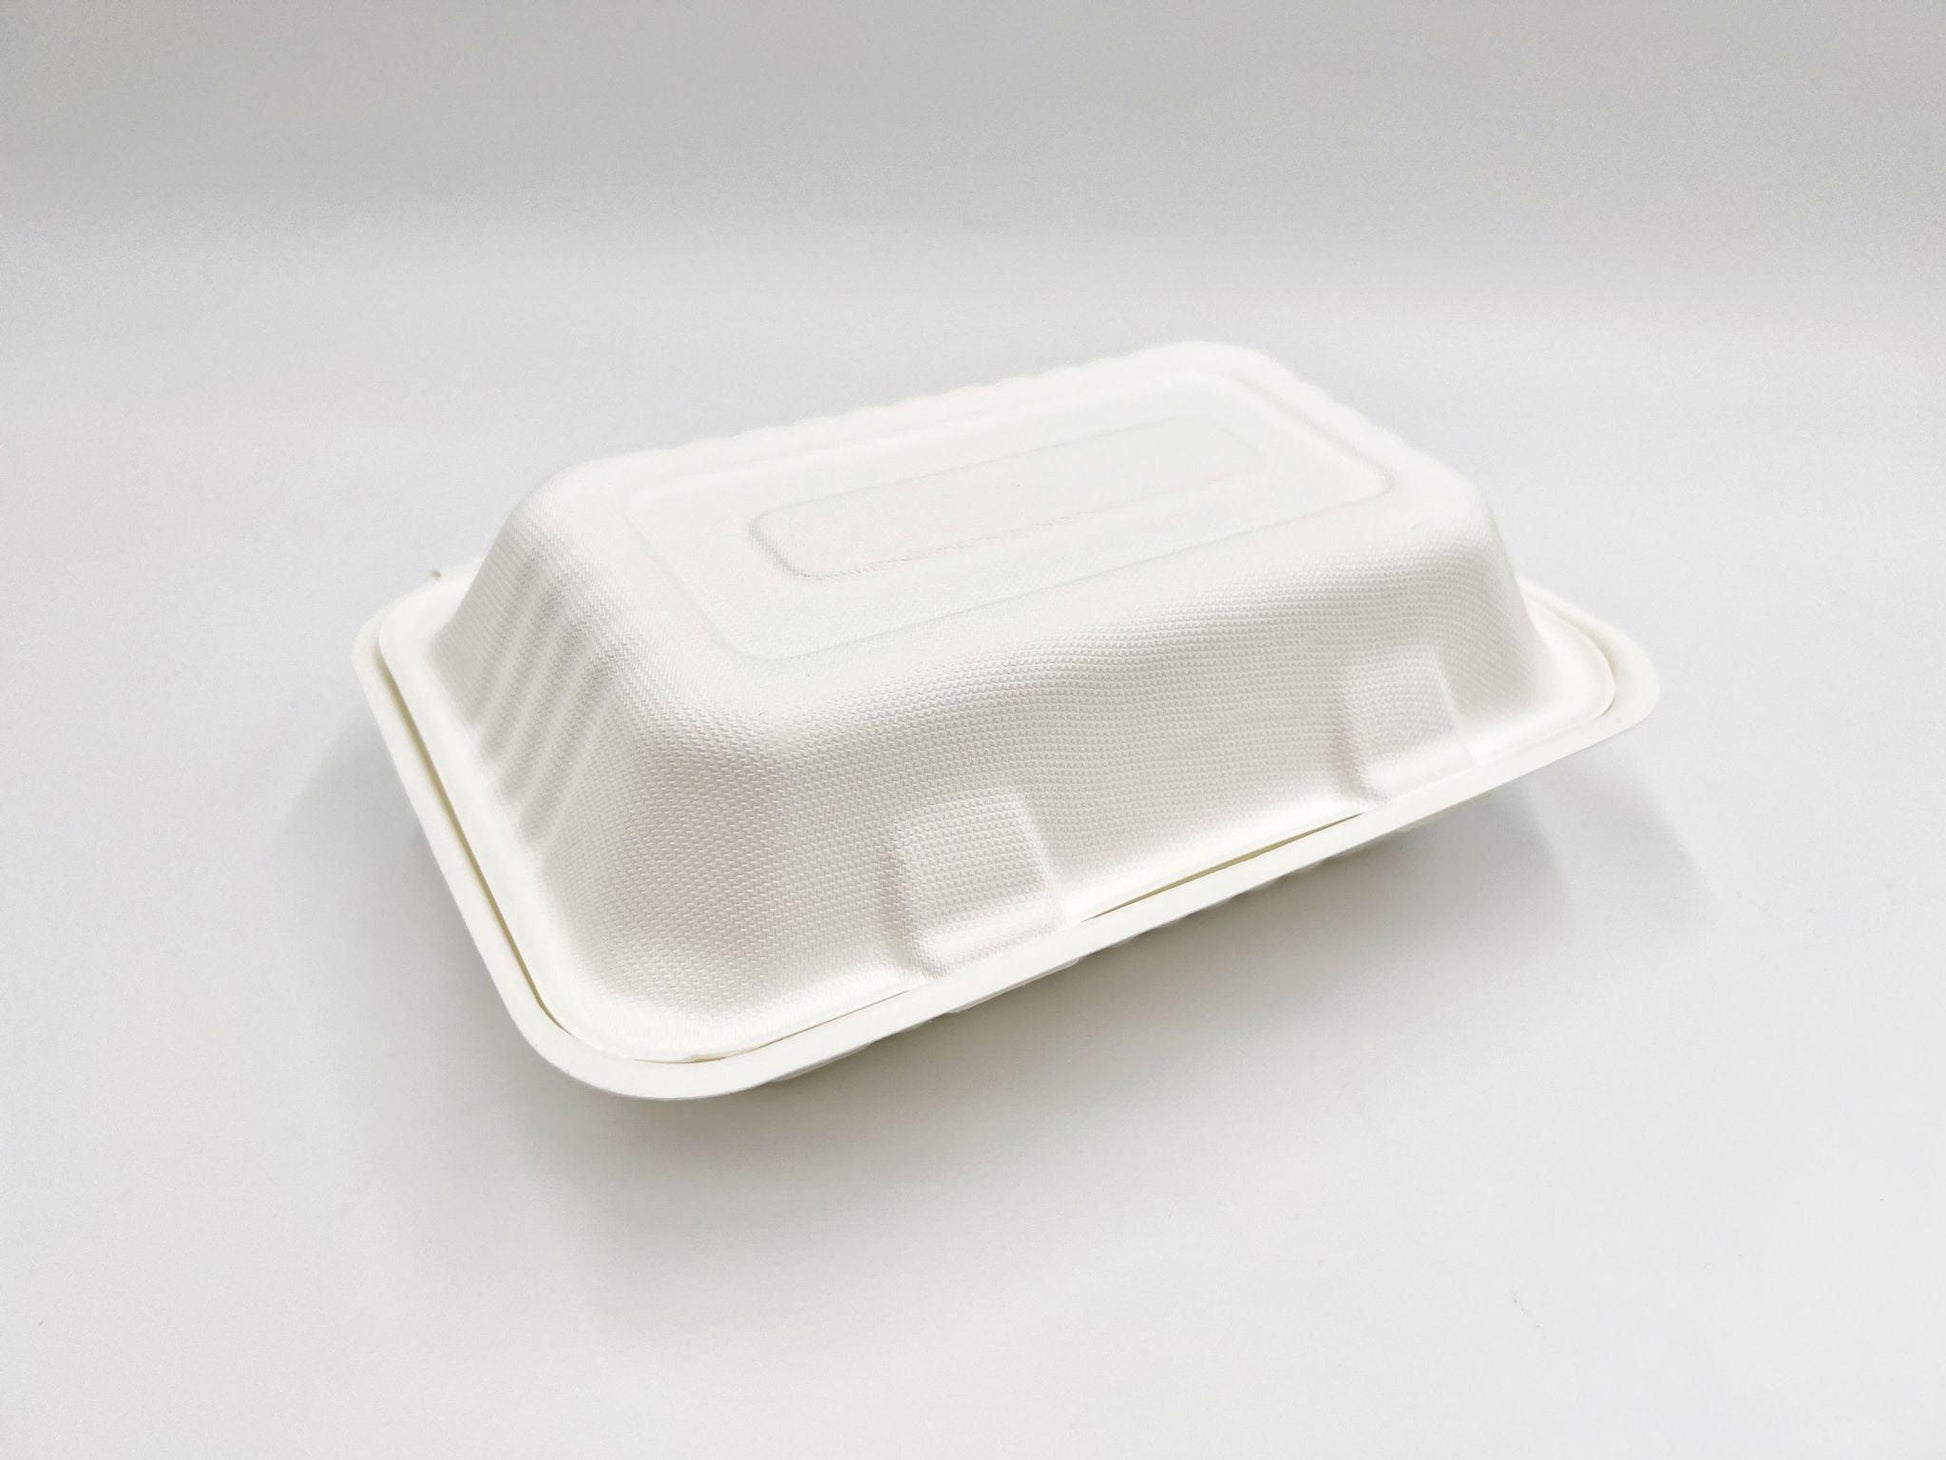 9x6 Inch To-go Box - Single Use, Disposable, Biodegradable - 250